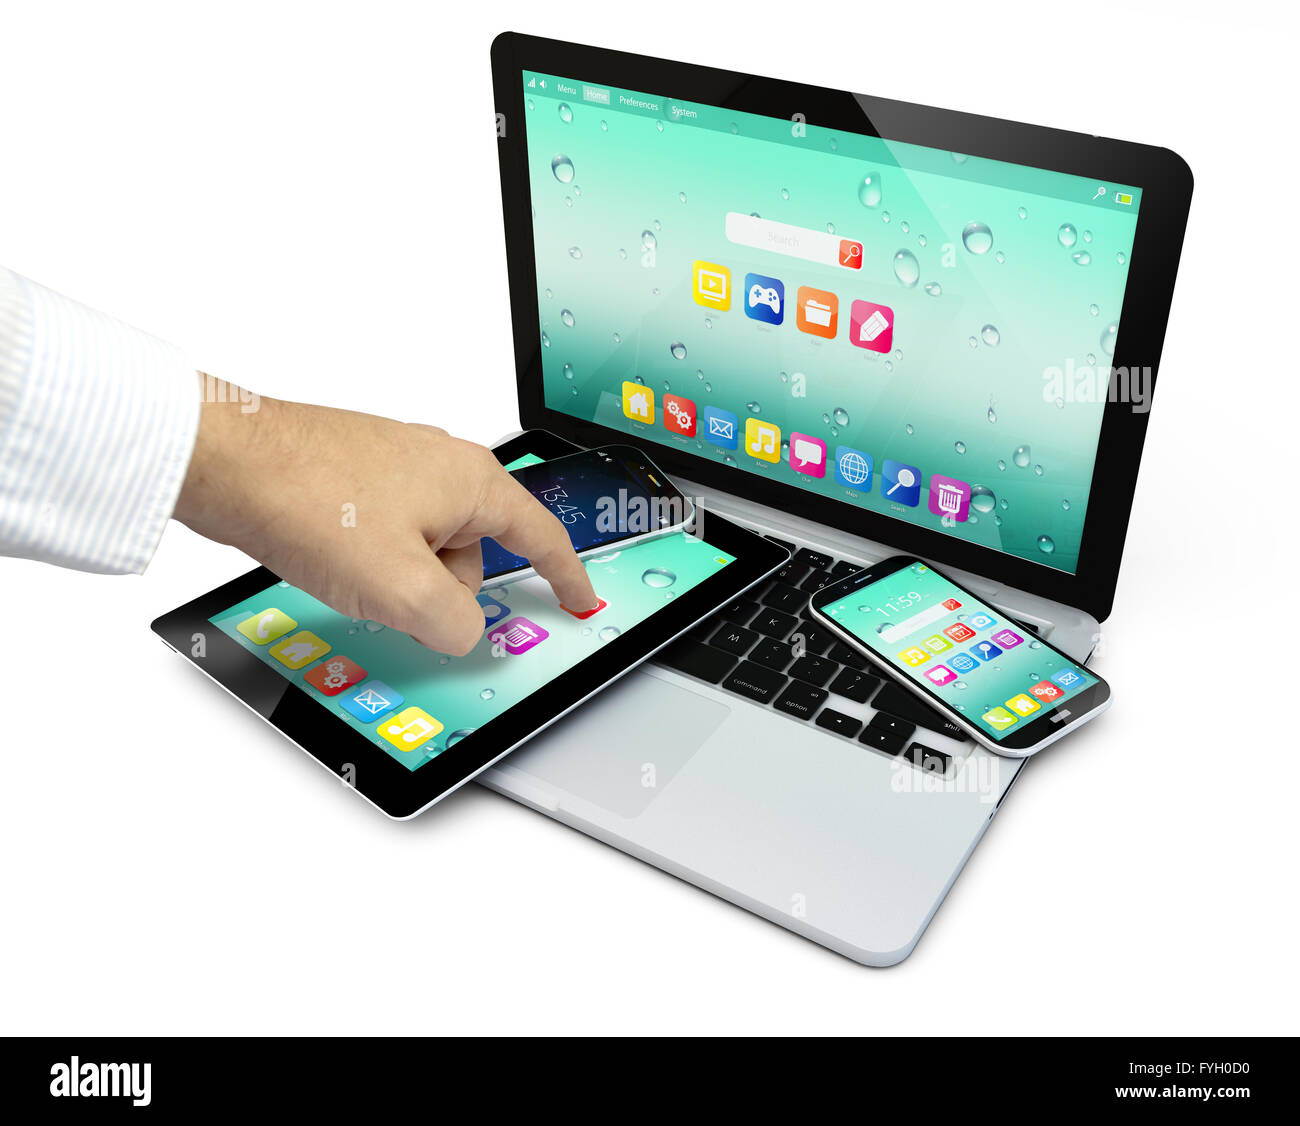 touchscreen tablet, computer laptop pc and smartphones with colorful interface with color icons and buttons and a hand touching Stock Photo